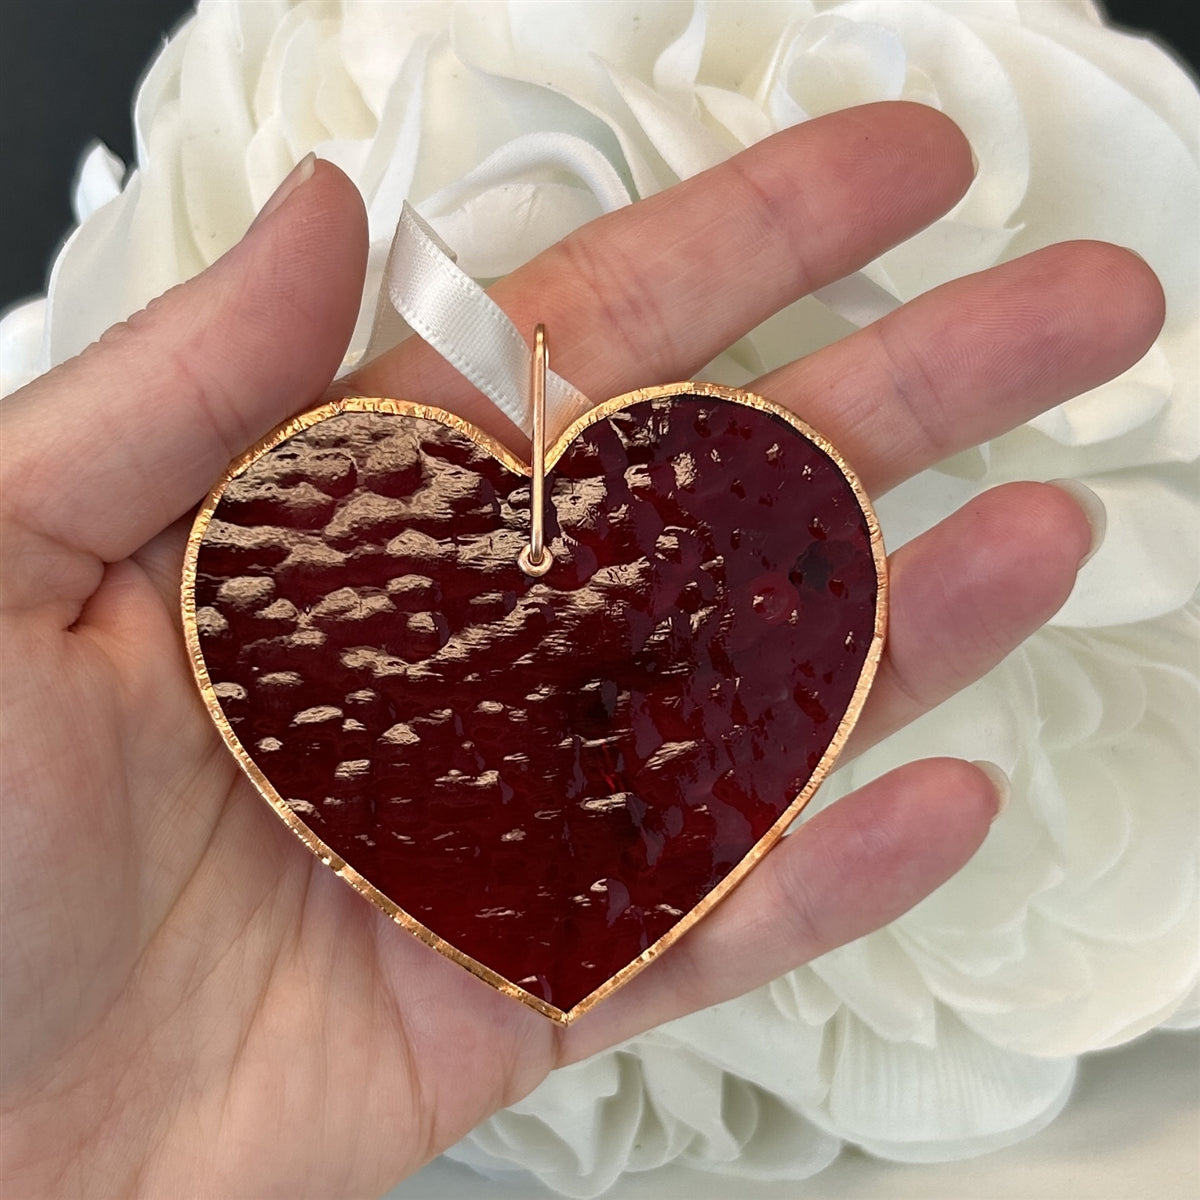 To My Parents on My Wedding Day: Glass Wedding Heart